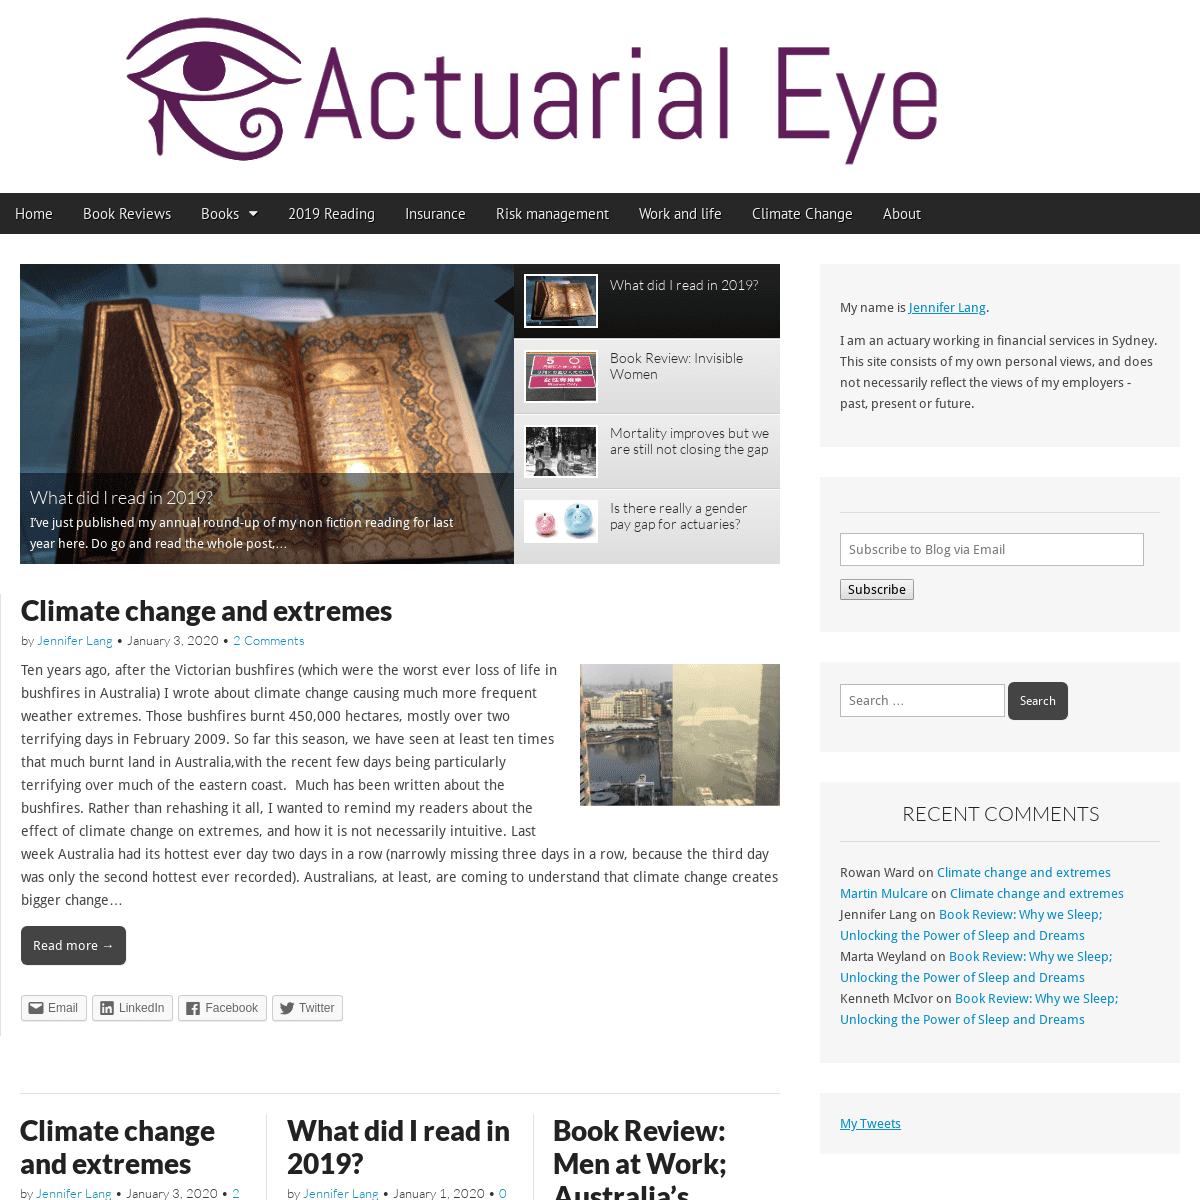 A complete backup of actuarialeye.com